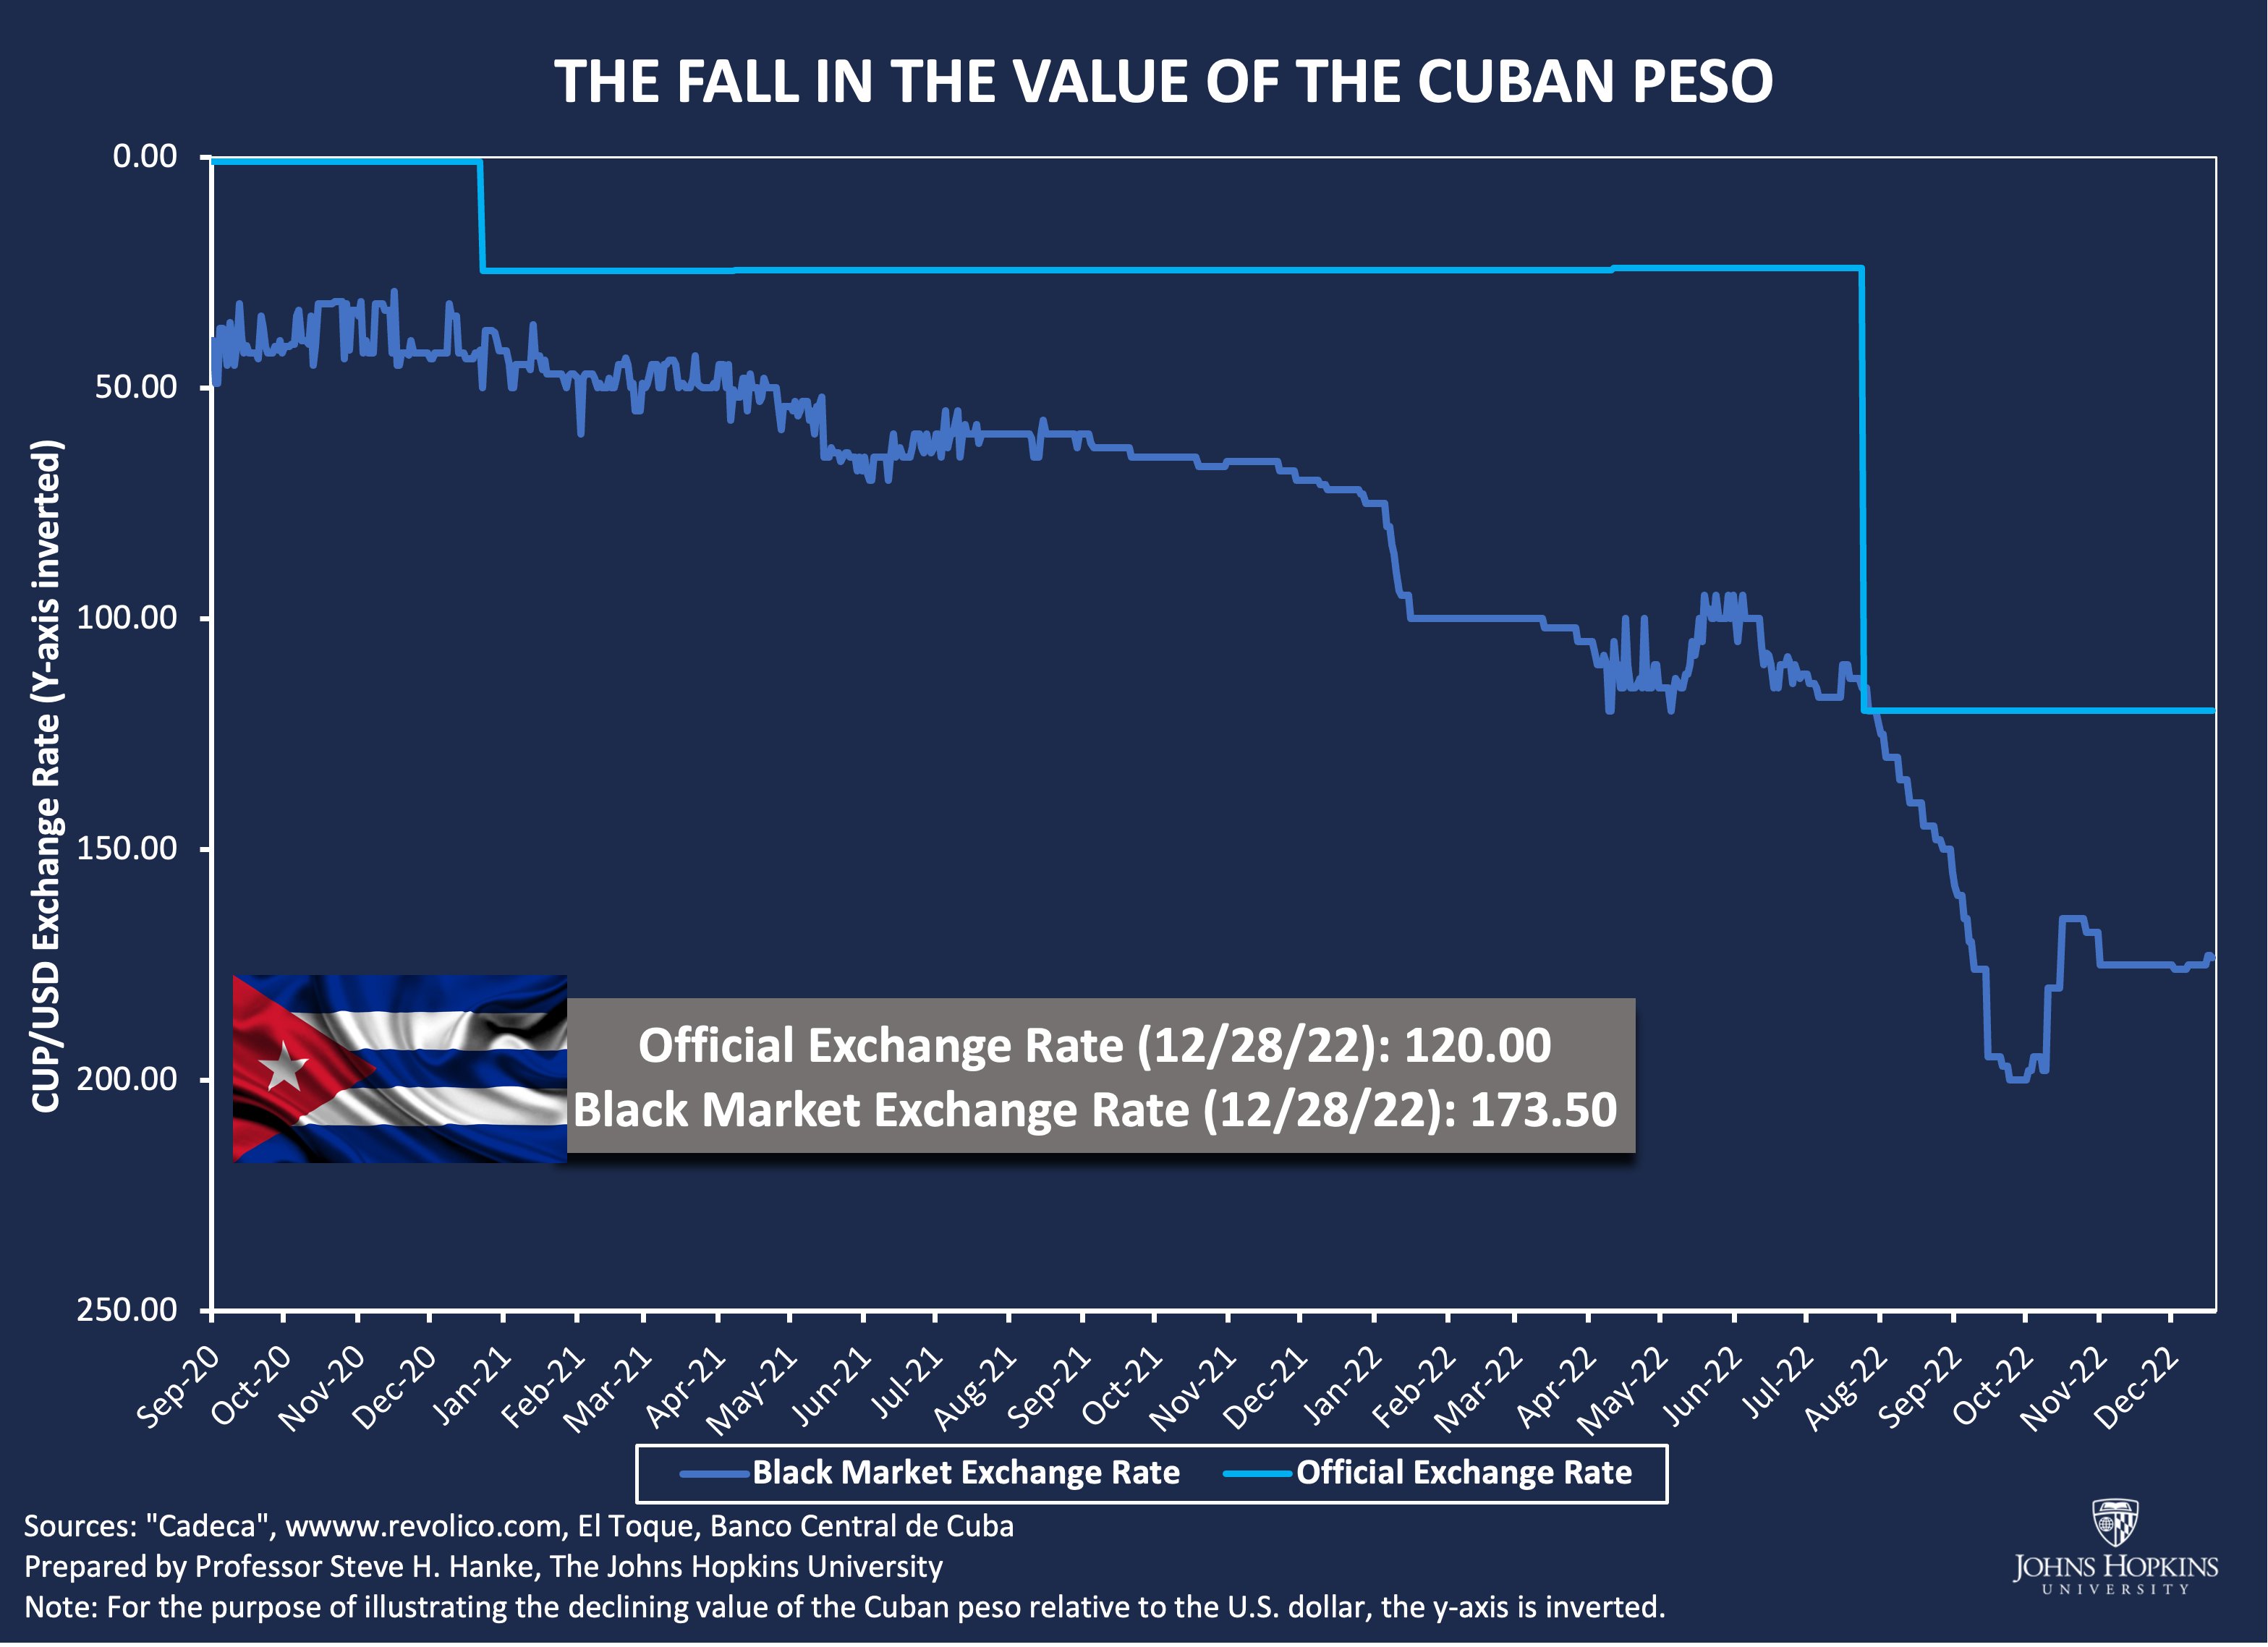 Steve Hanke on X: The value of the Cuban peso is nowhere to be